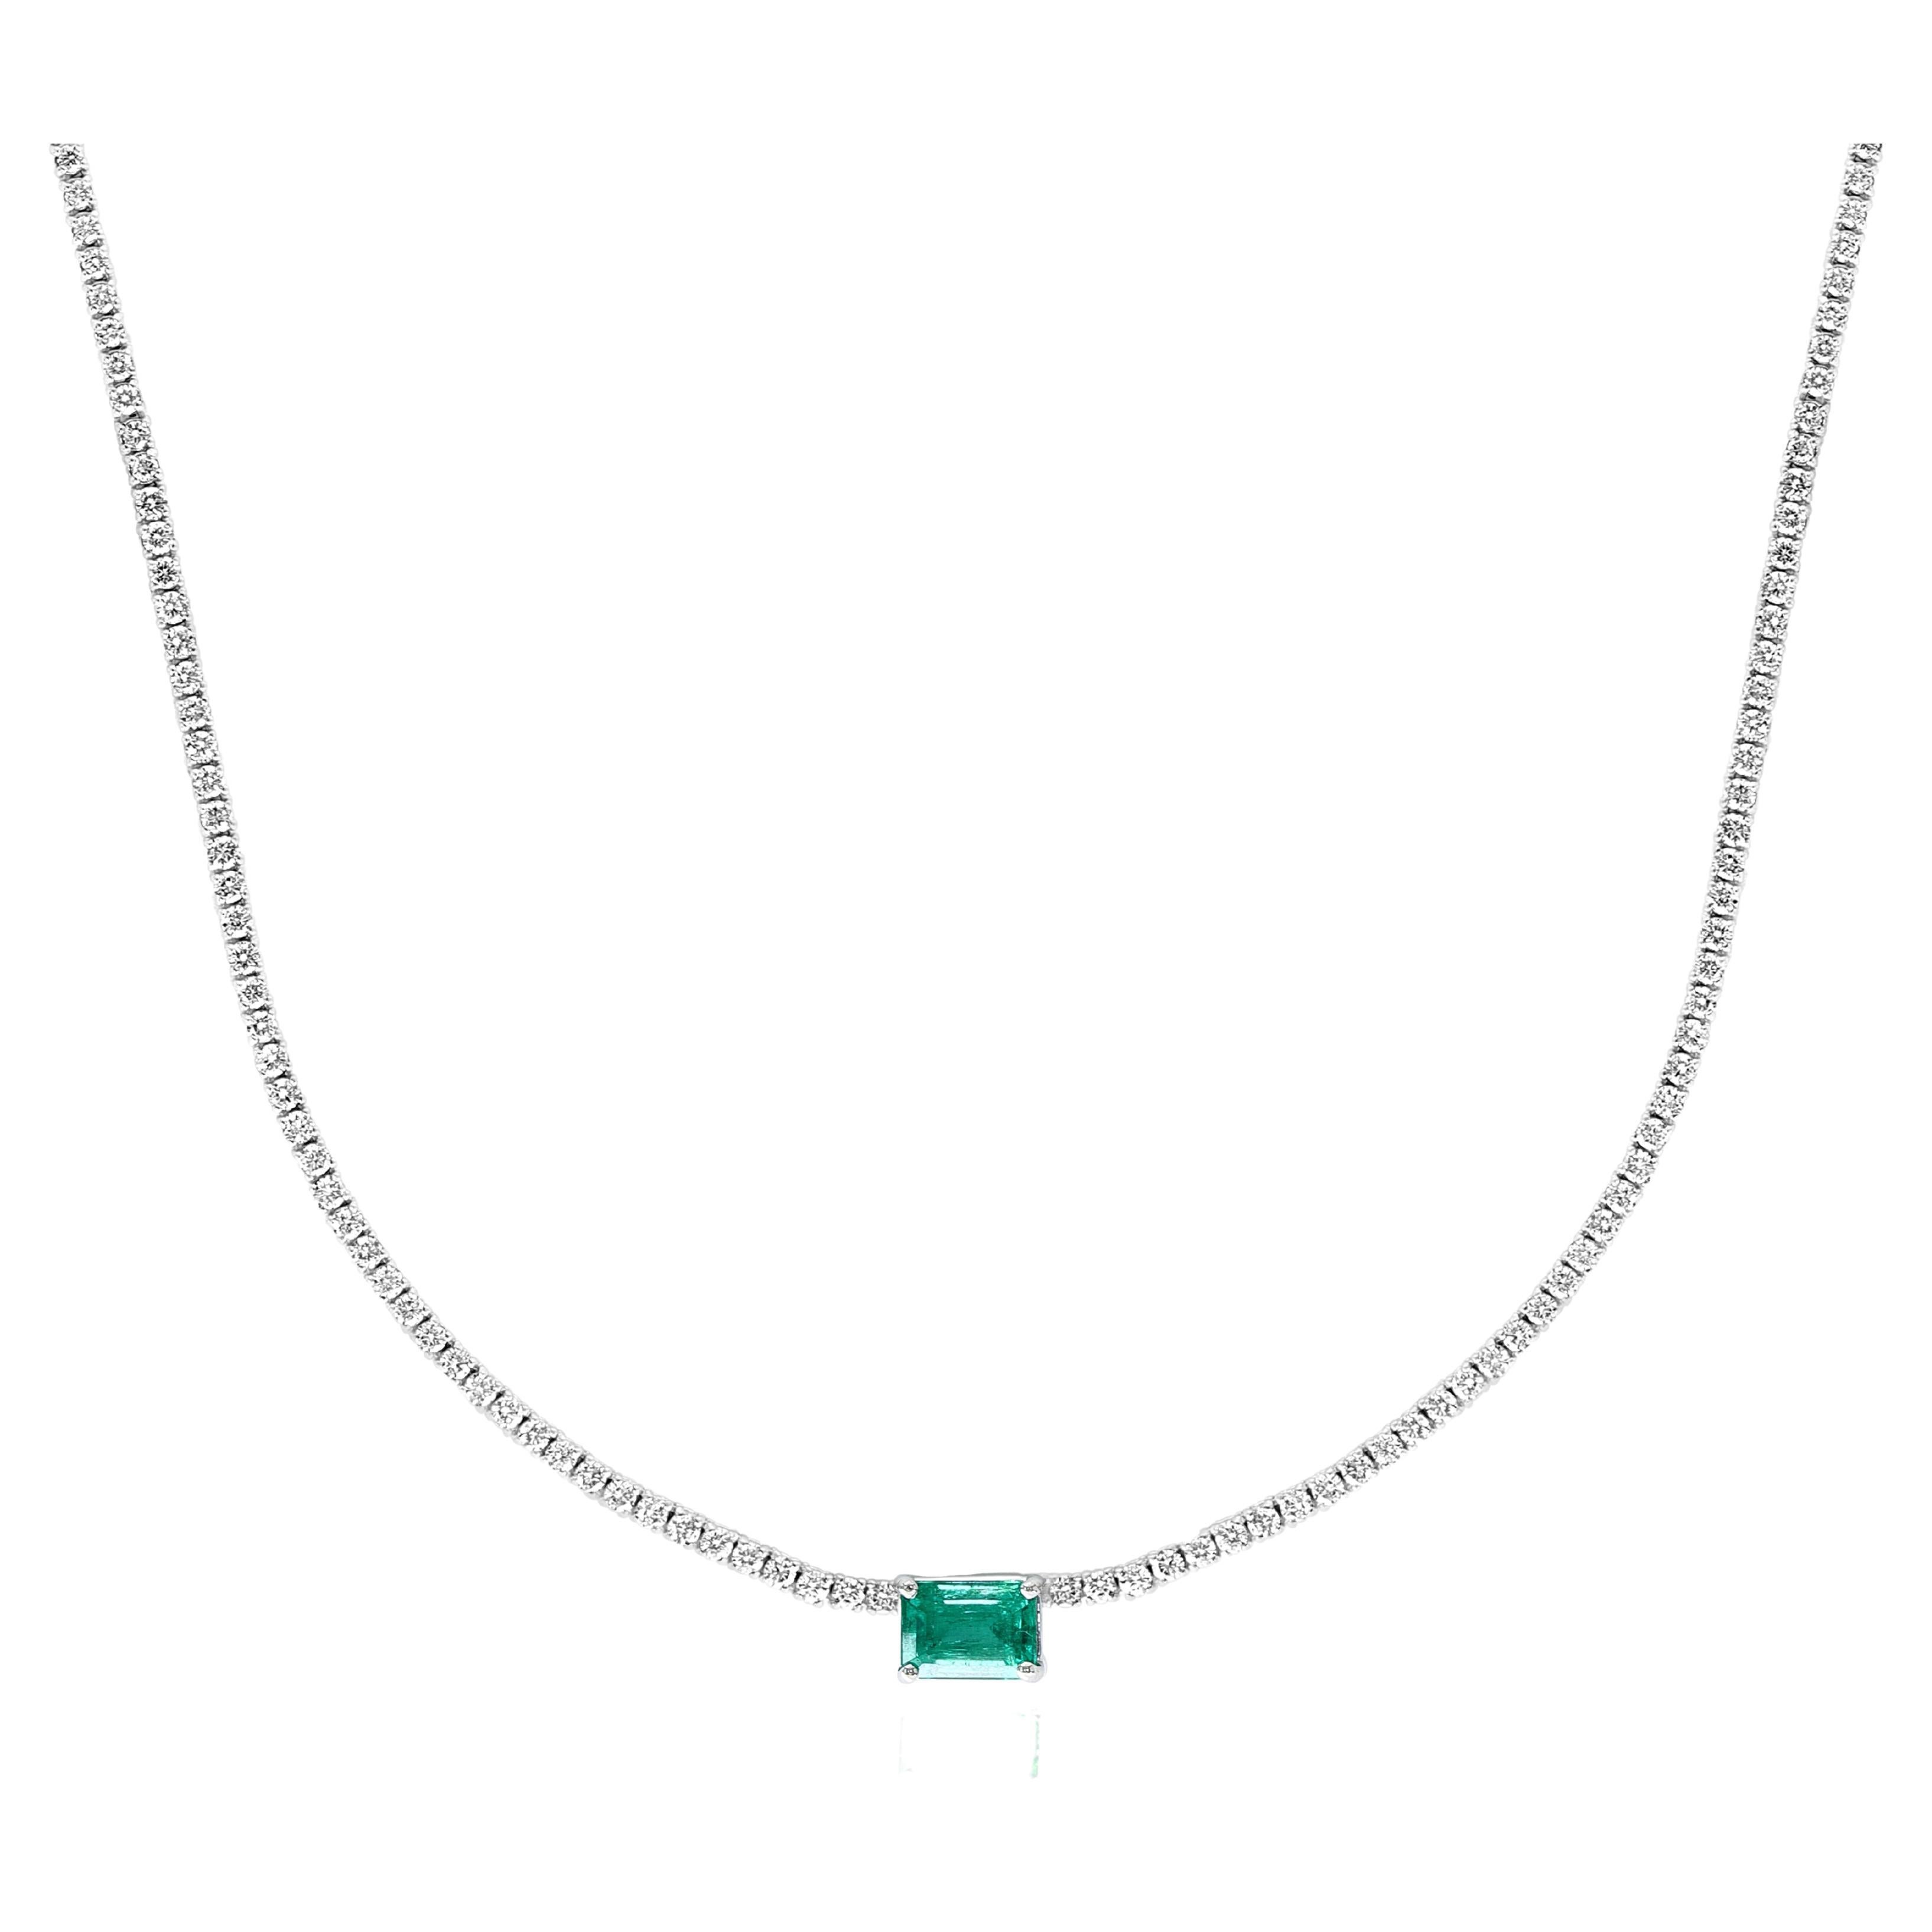 1.88 Carat Emerald Cut Emerald and Diamond Tennis Necklace in 14k White Gold For Sale